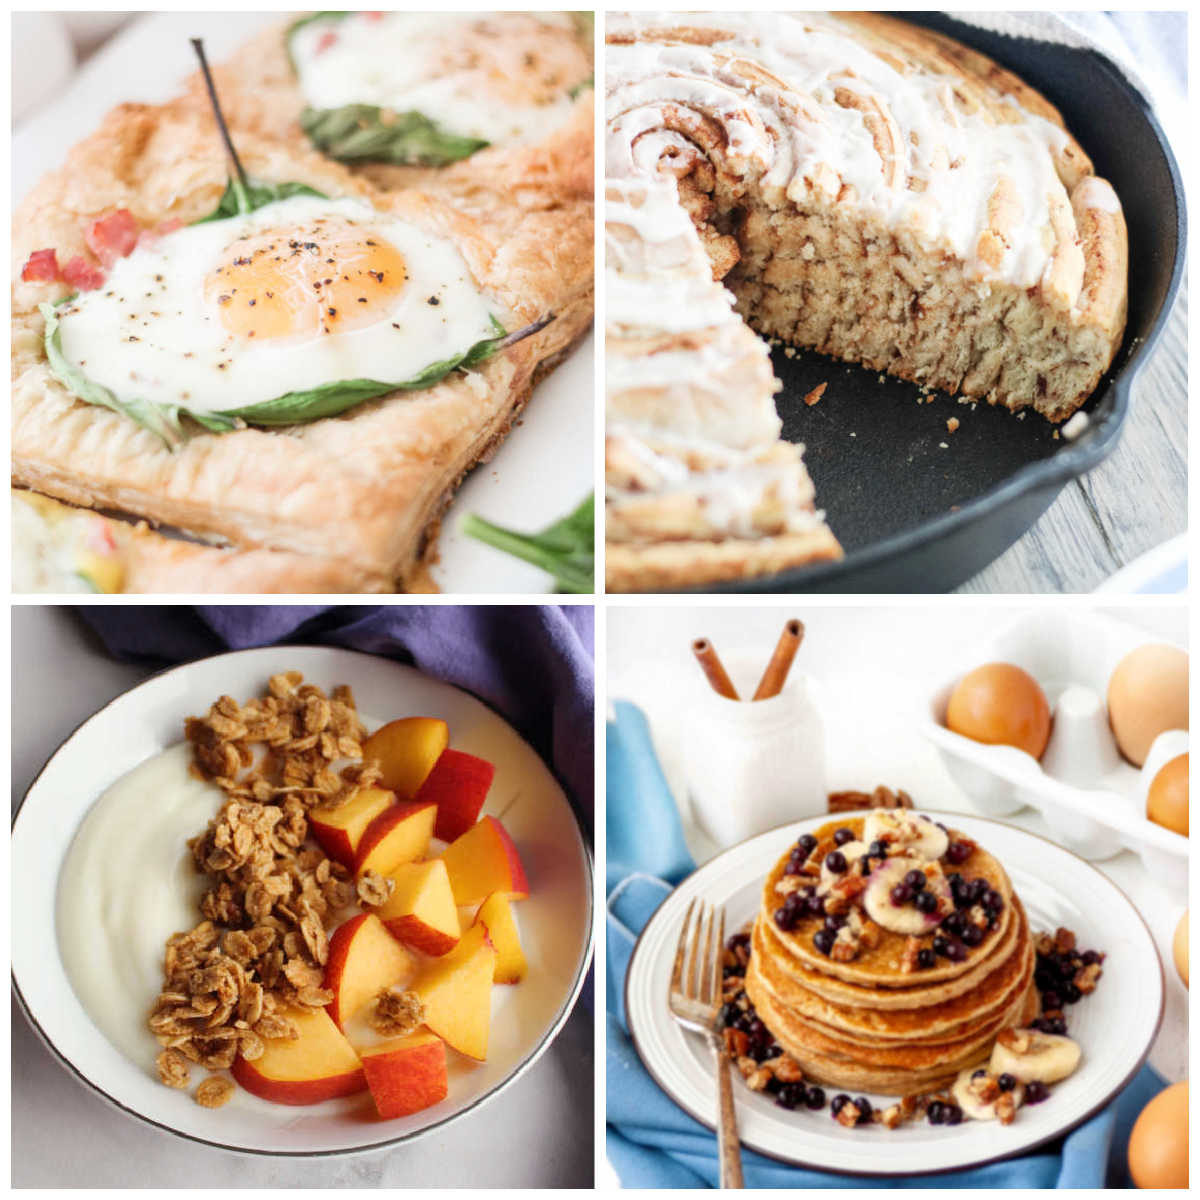 Collage of breakfast recipe including eggs benedict tarts, cinnamon roll, granola and pancakes.